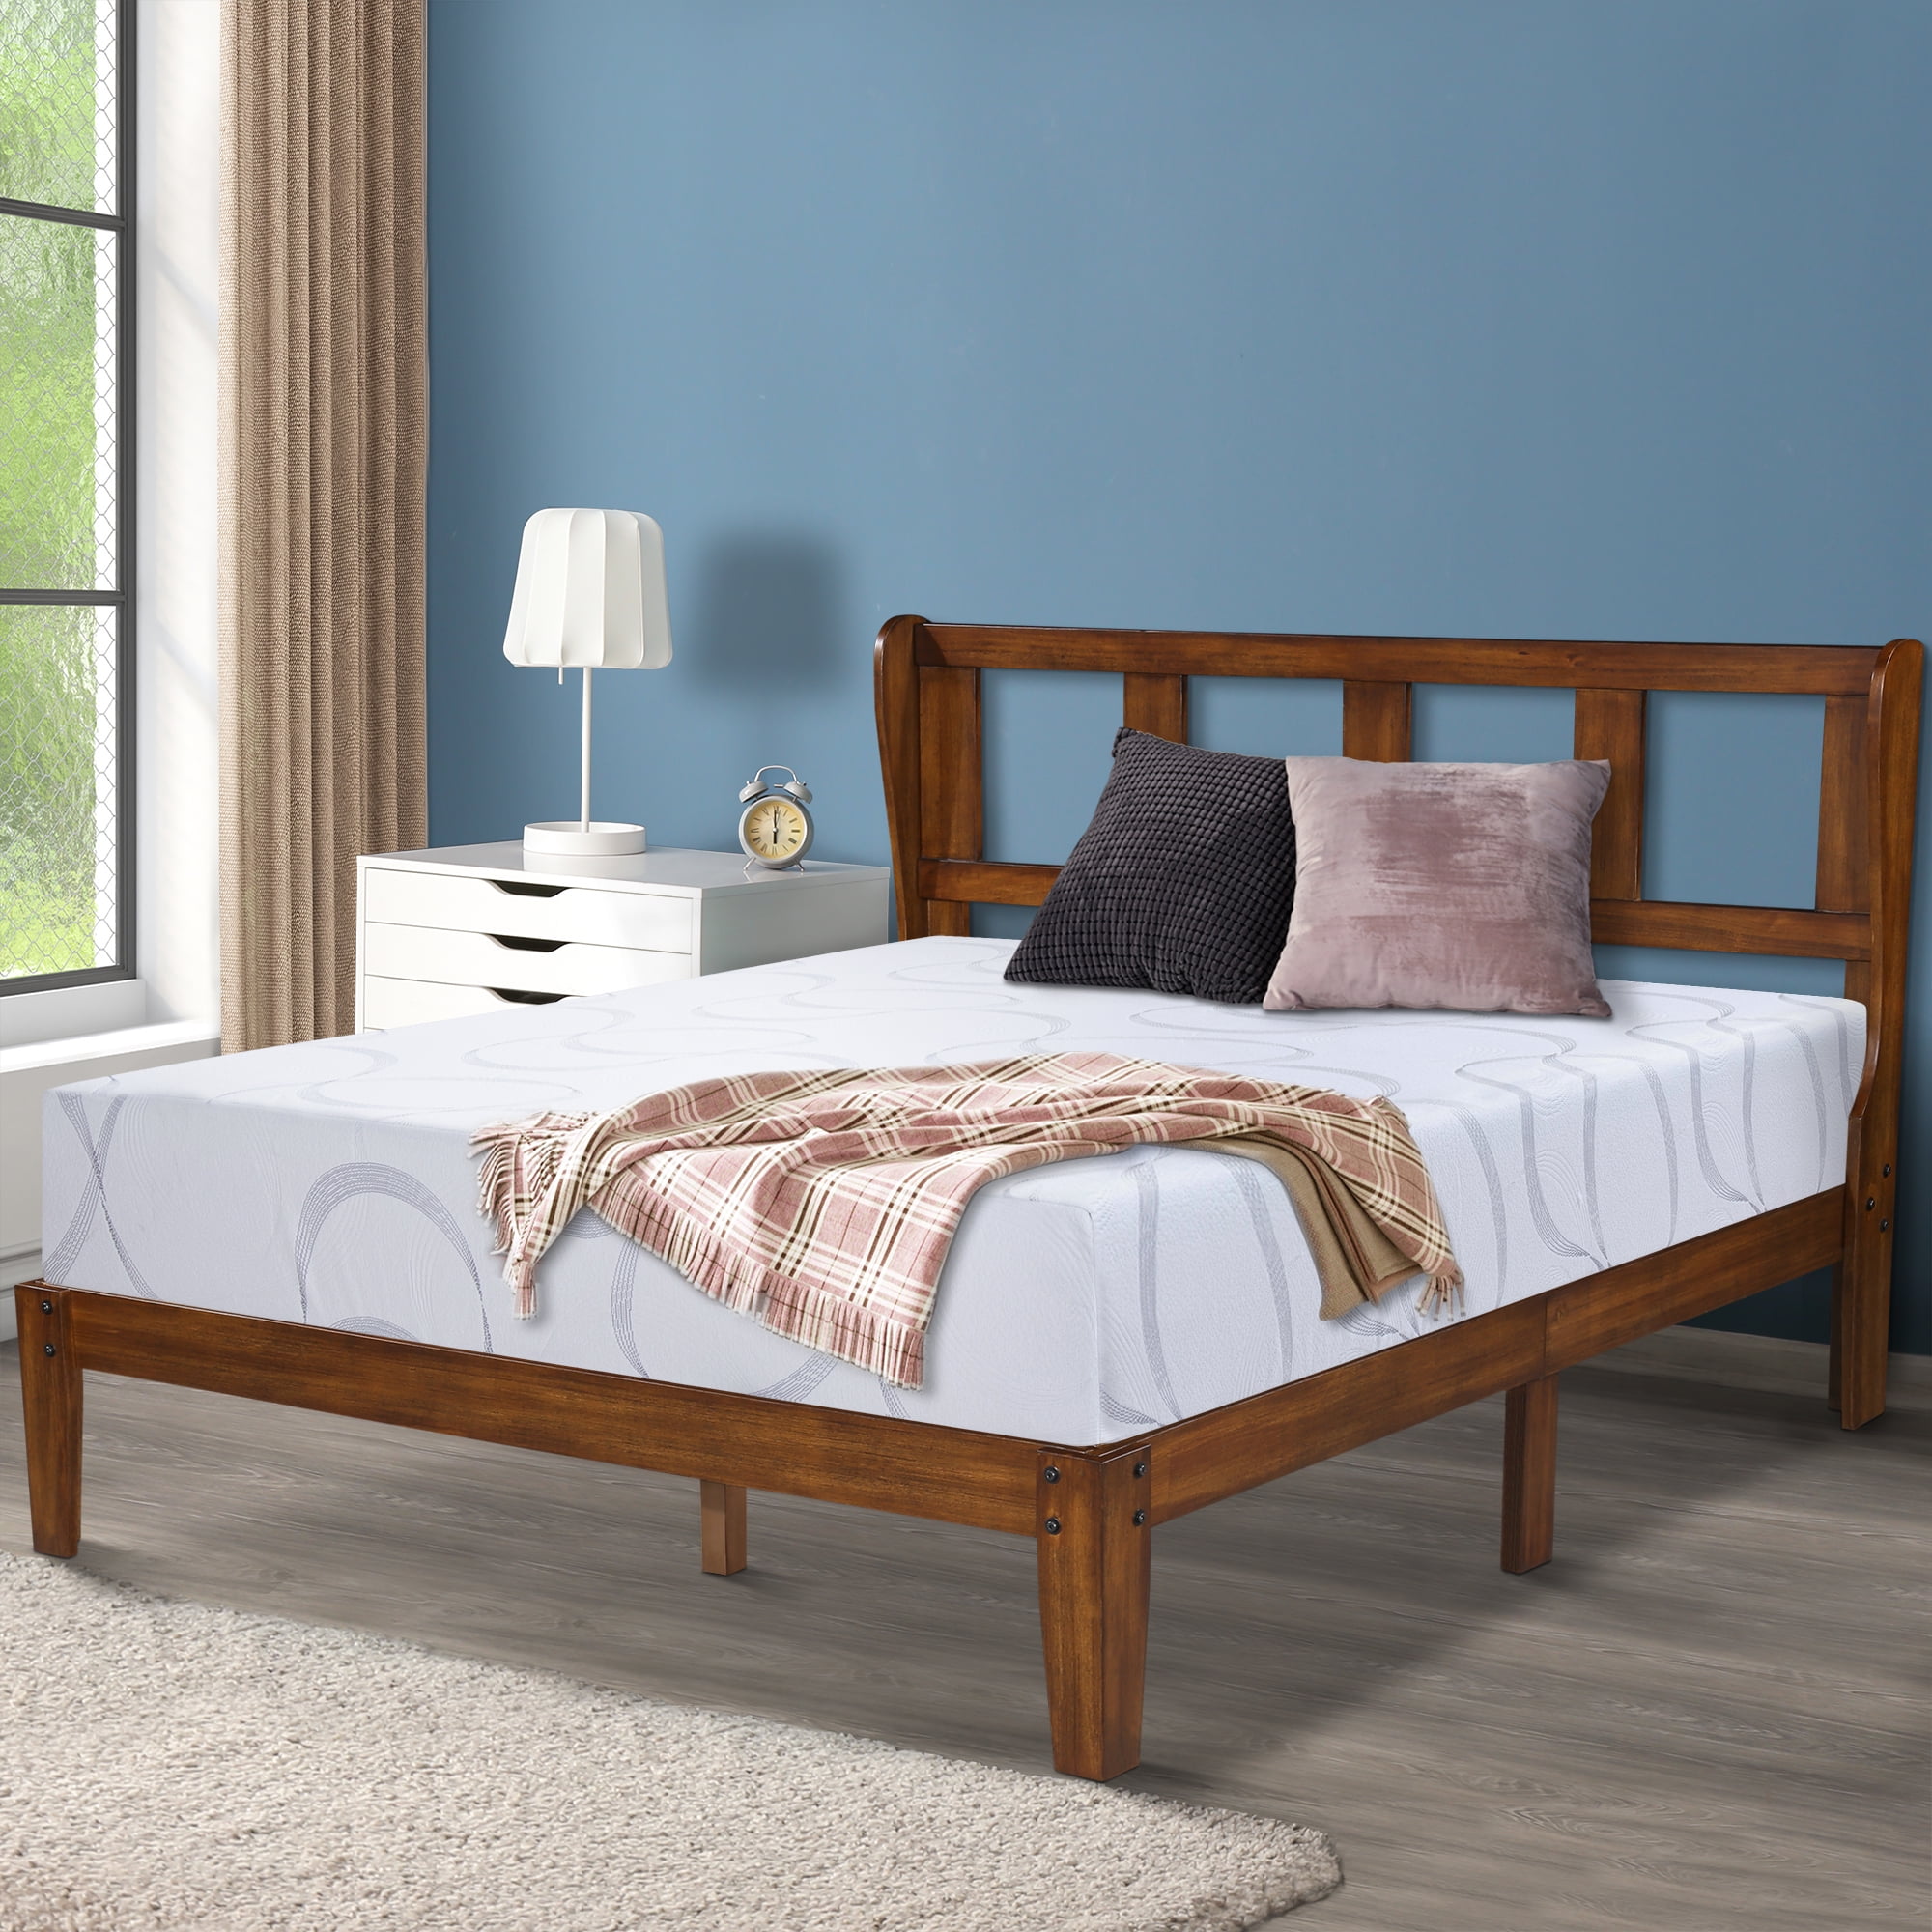 Zinus Priage By Deluxe Antique Espresso, Priage By Zinus Antique Espresso Solid Wood Platform Bed With Headboard